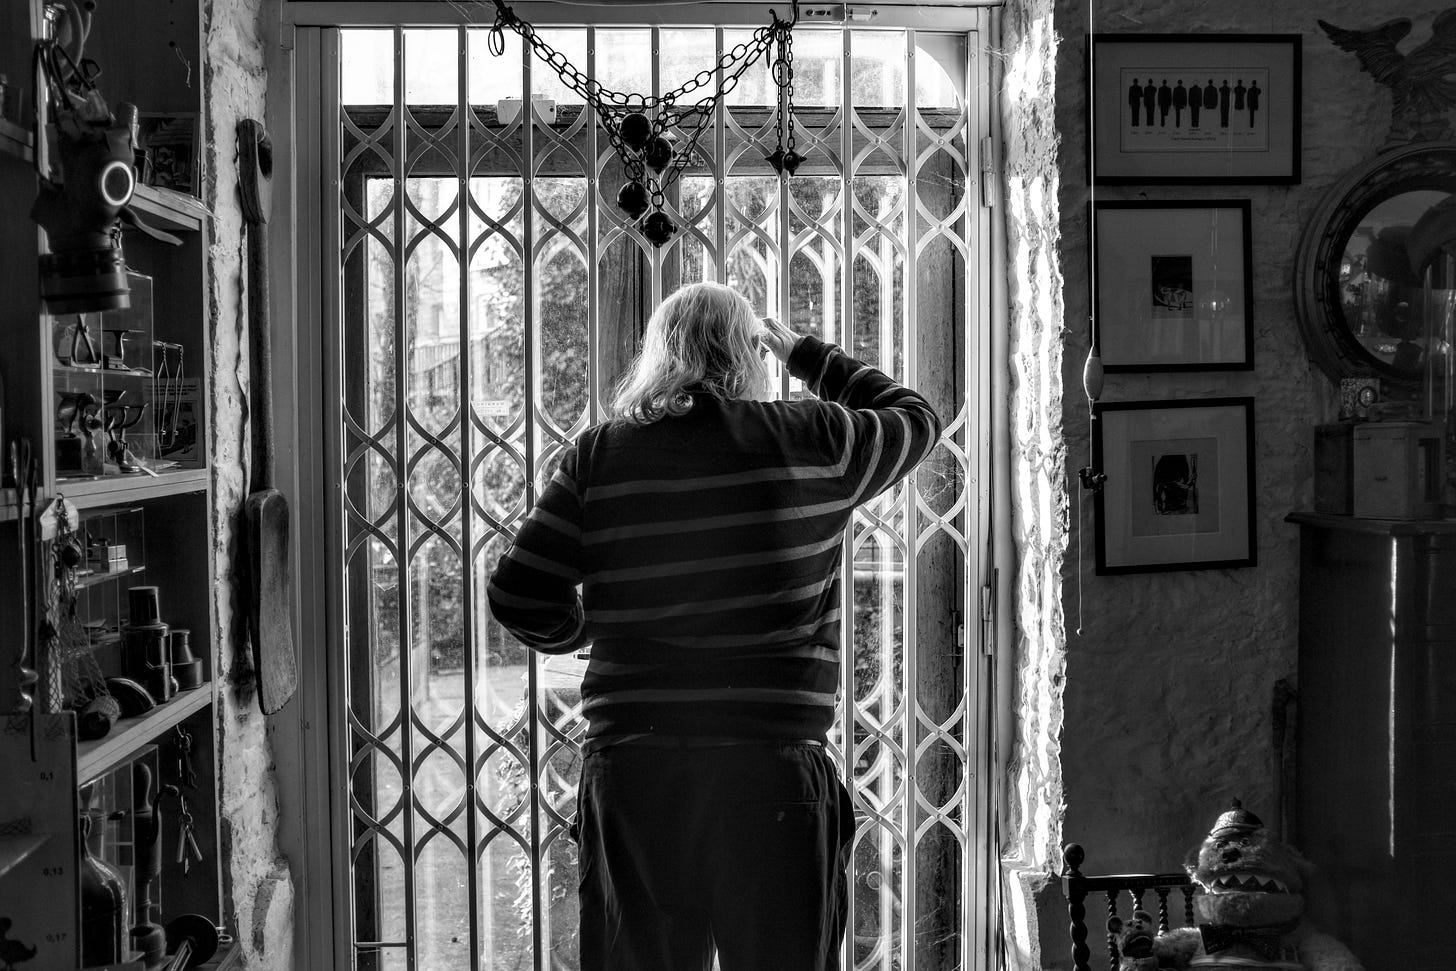 On a visit to see Wilf Lunn I took this photo of him looking out through a locked door with a grill on it. The photo has his back to the camera almost in silhouette with his hand up to shed his eyes. The shelves and walls on either side are cluttered with knick knacks.